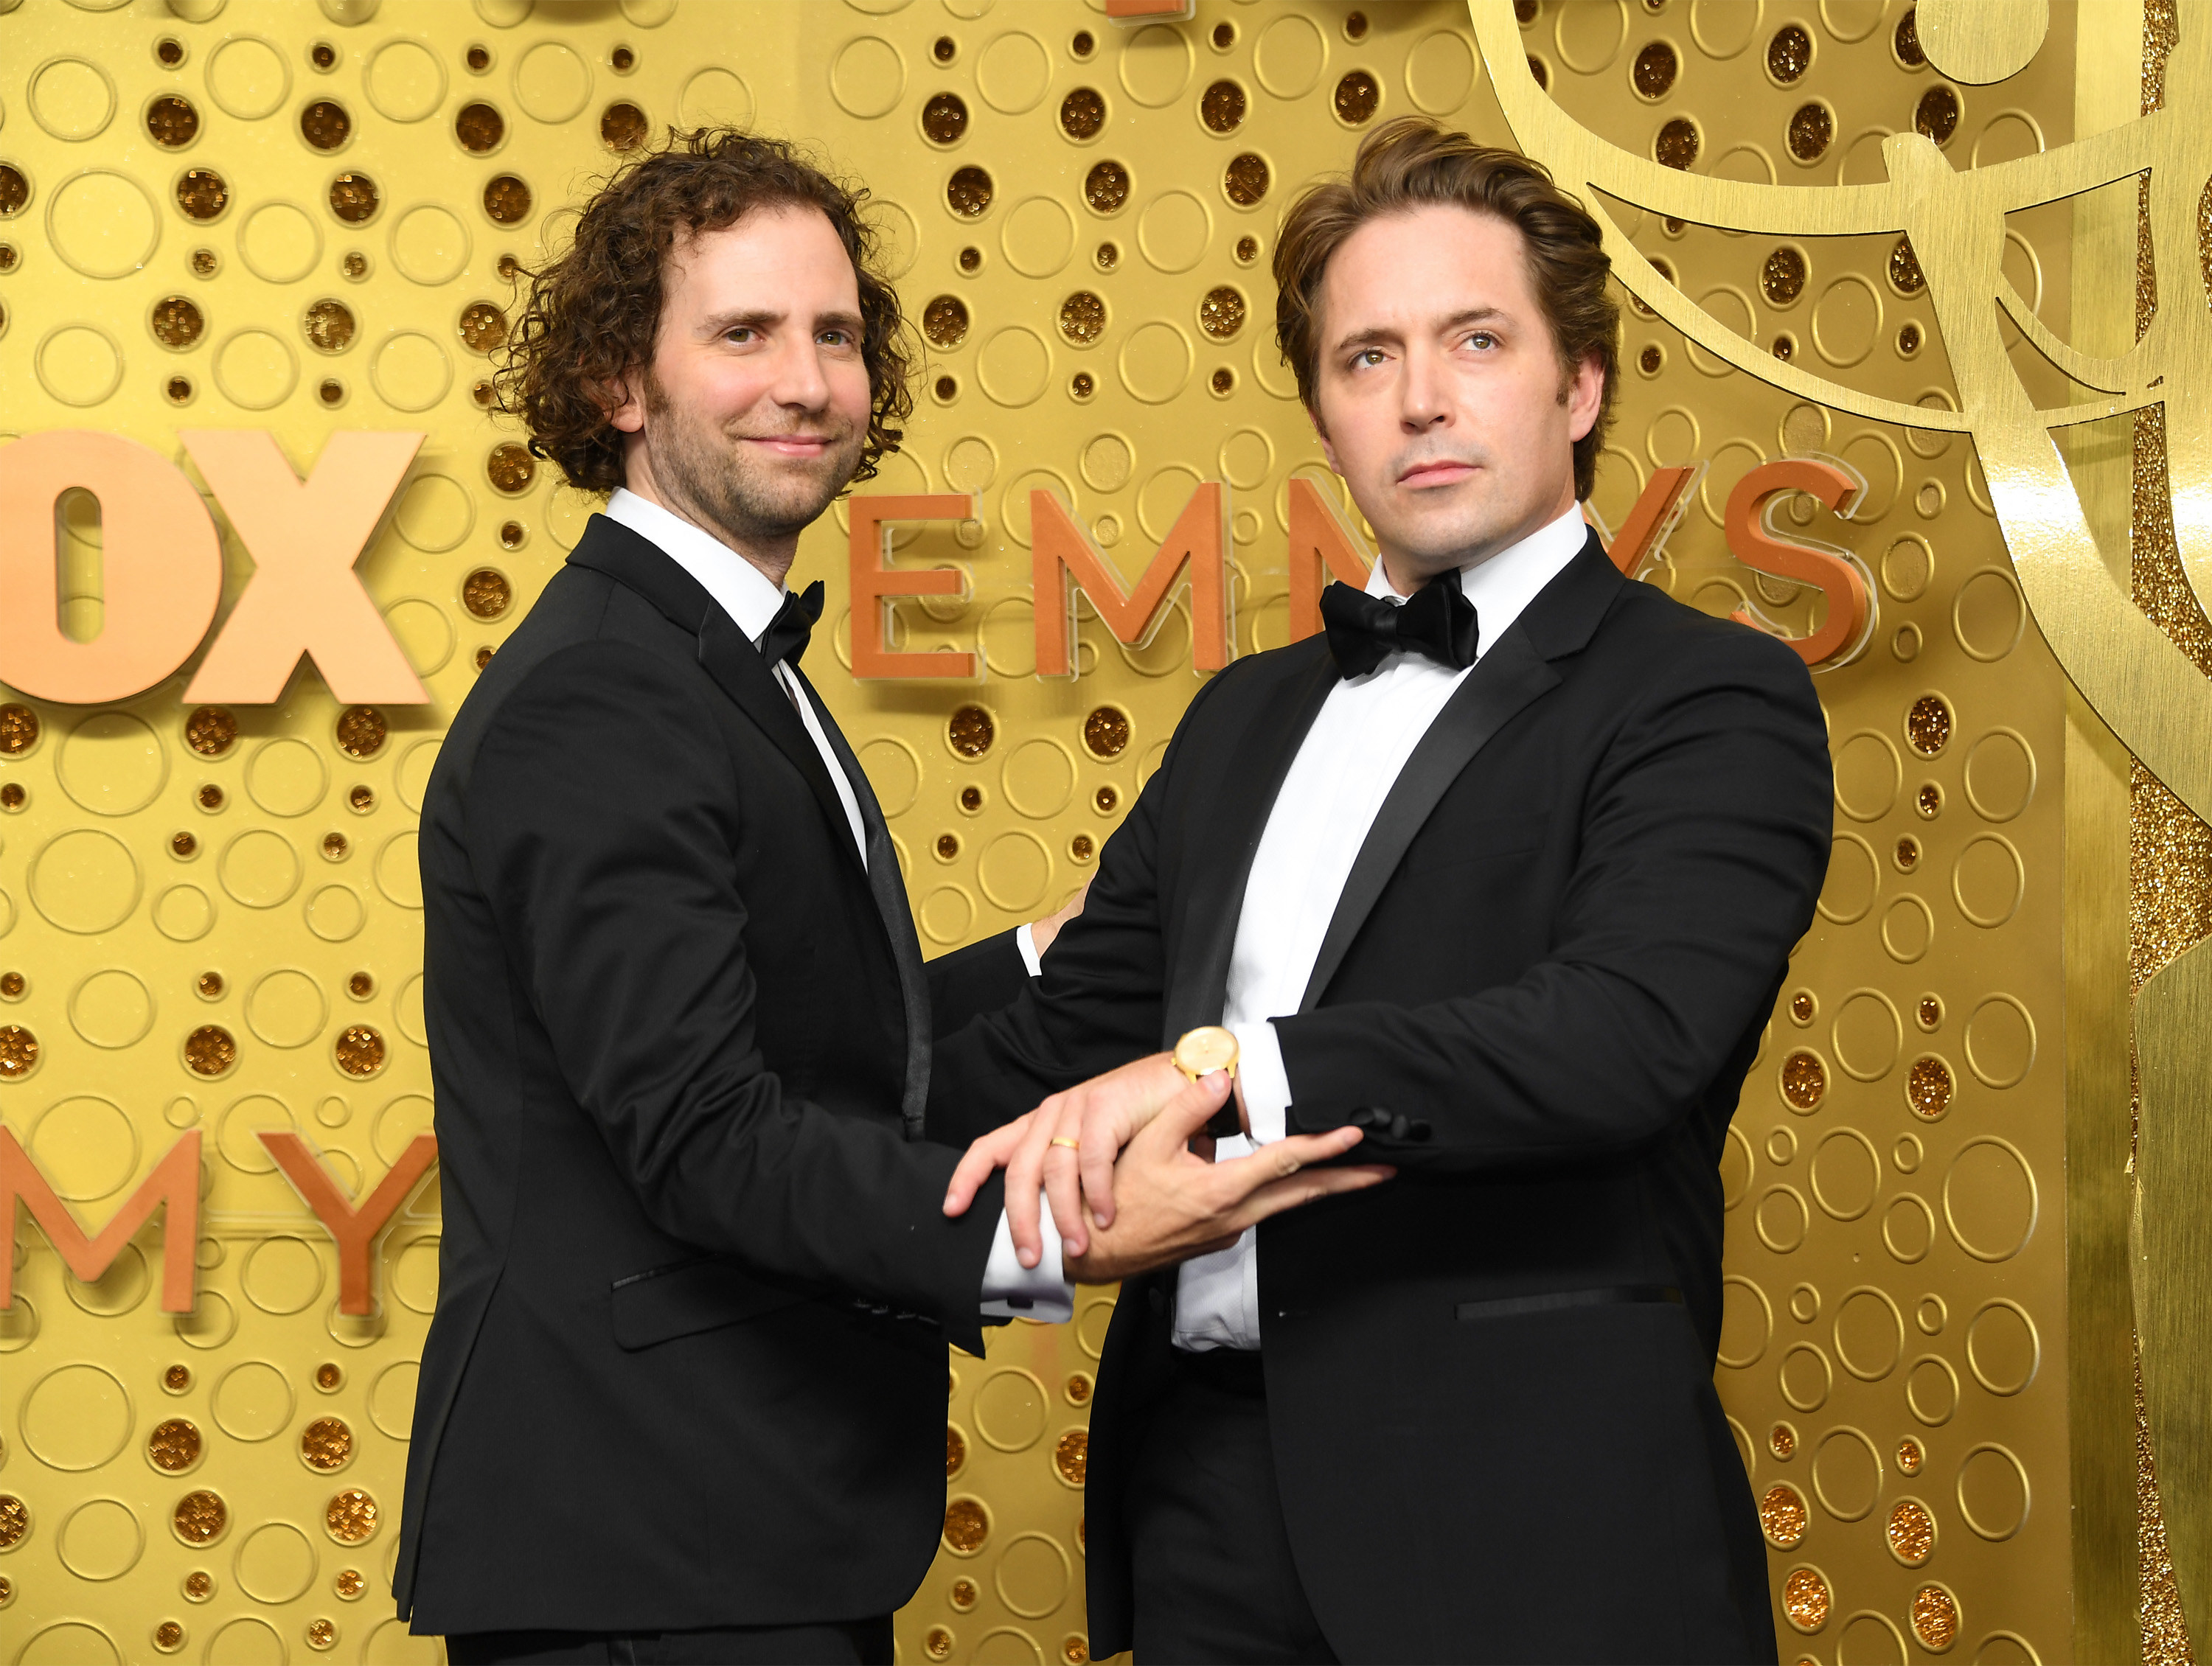 Kyle Mooney and Beck Bennett are seen at the Emmy Awards on September 22, 2019